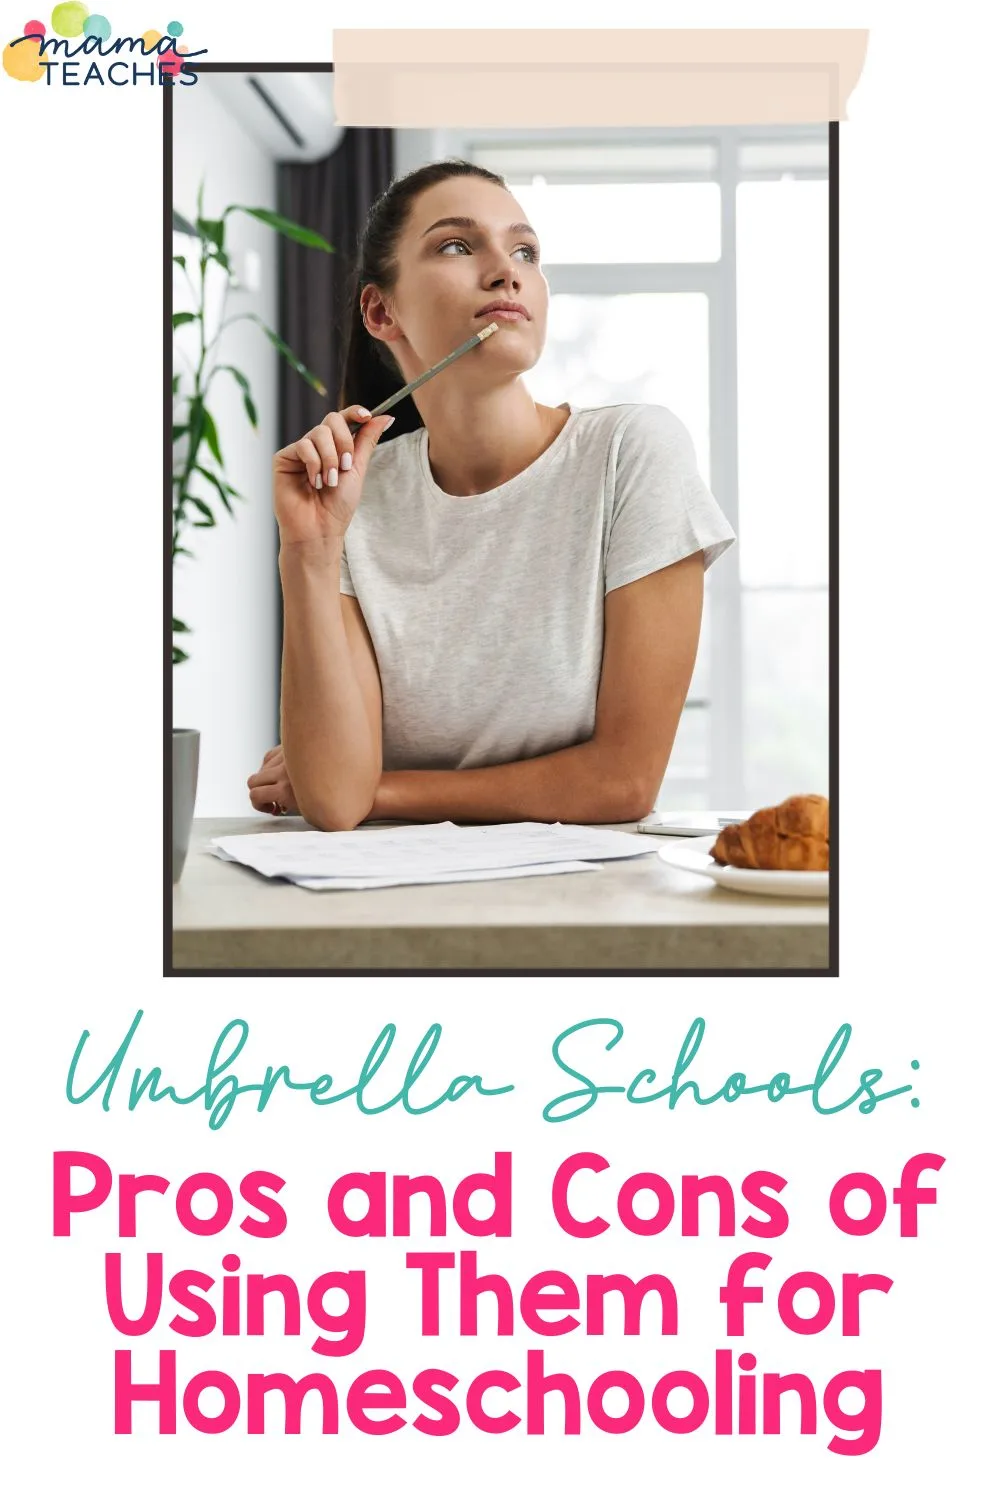 Umbrella Schools Pros and Cons of Using Them for Homeschooling